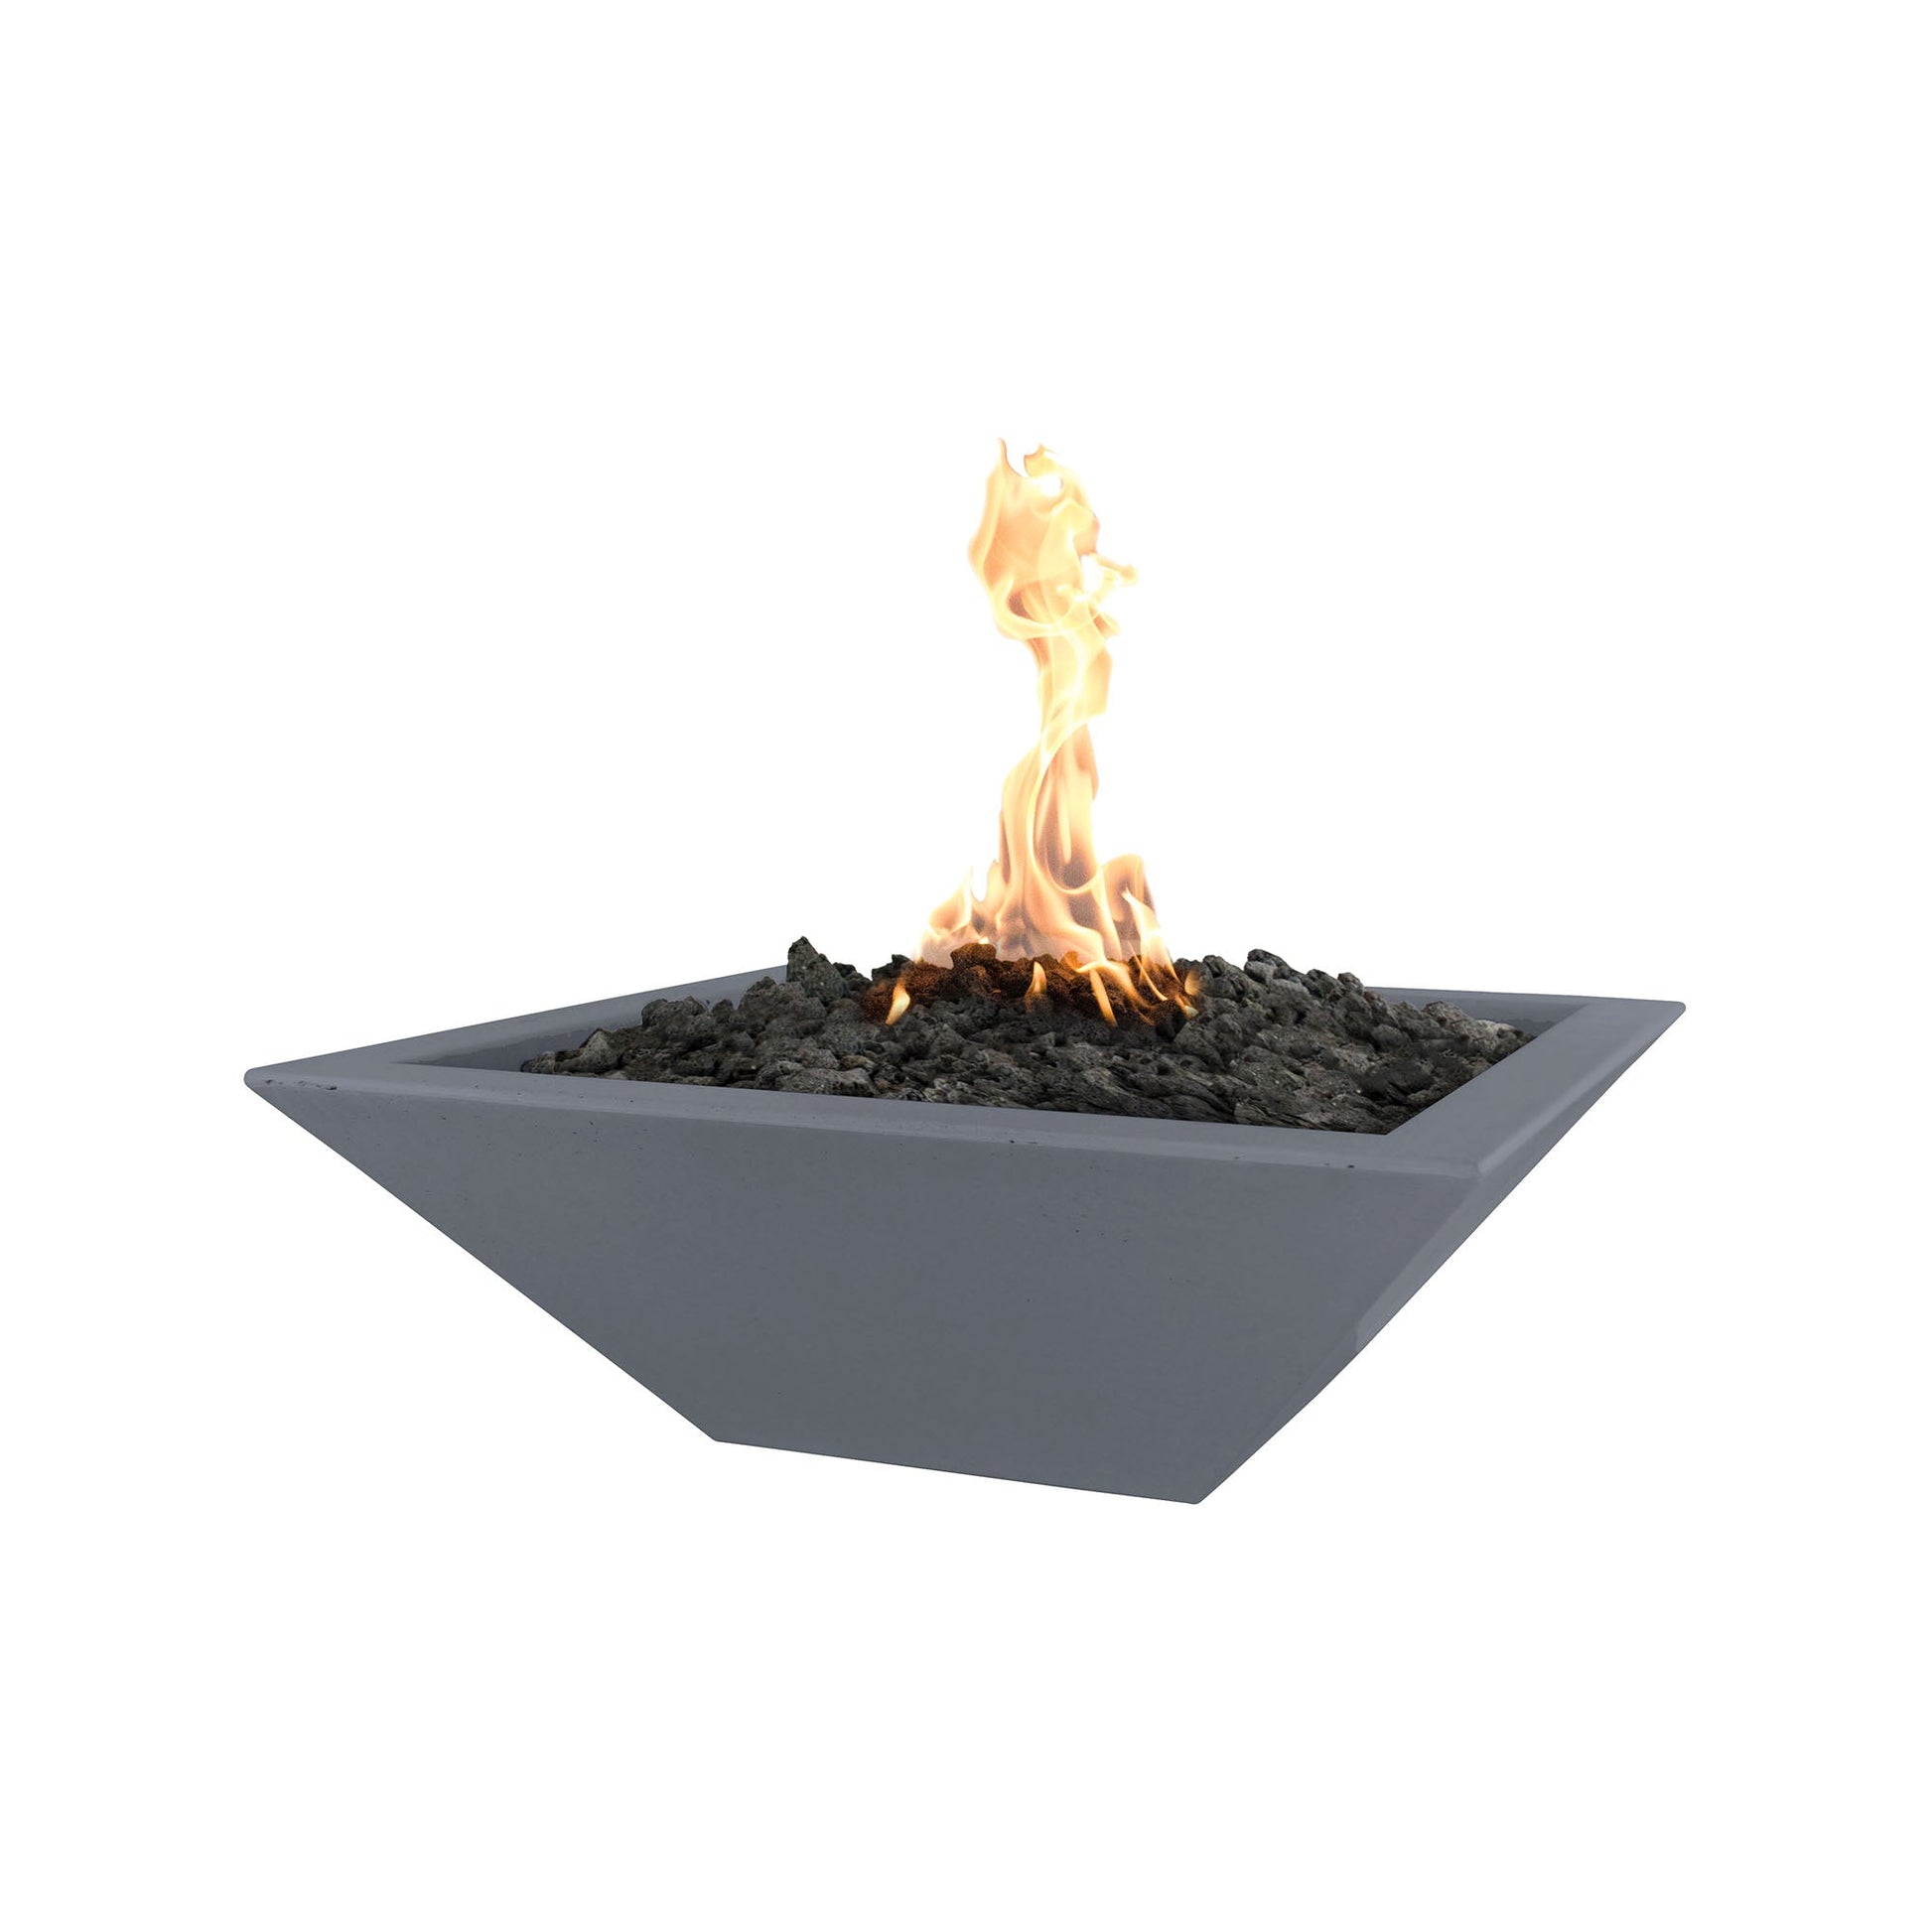 The Outdoor Plus Square Maya 30" Chestnut GFRC Concrete Natural Gas Fire Bowl with Match Lit with Flame Sense Ignition